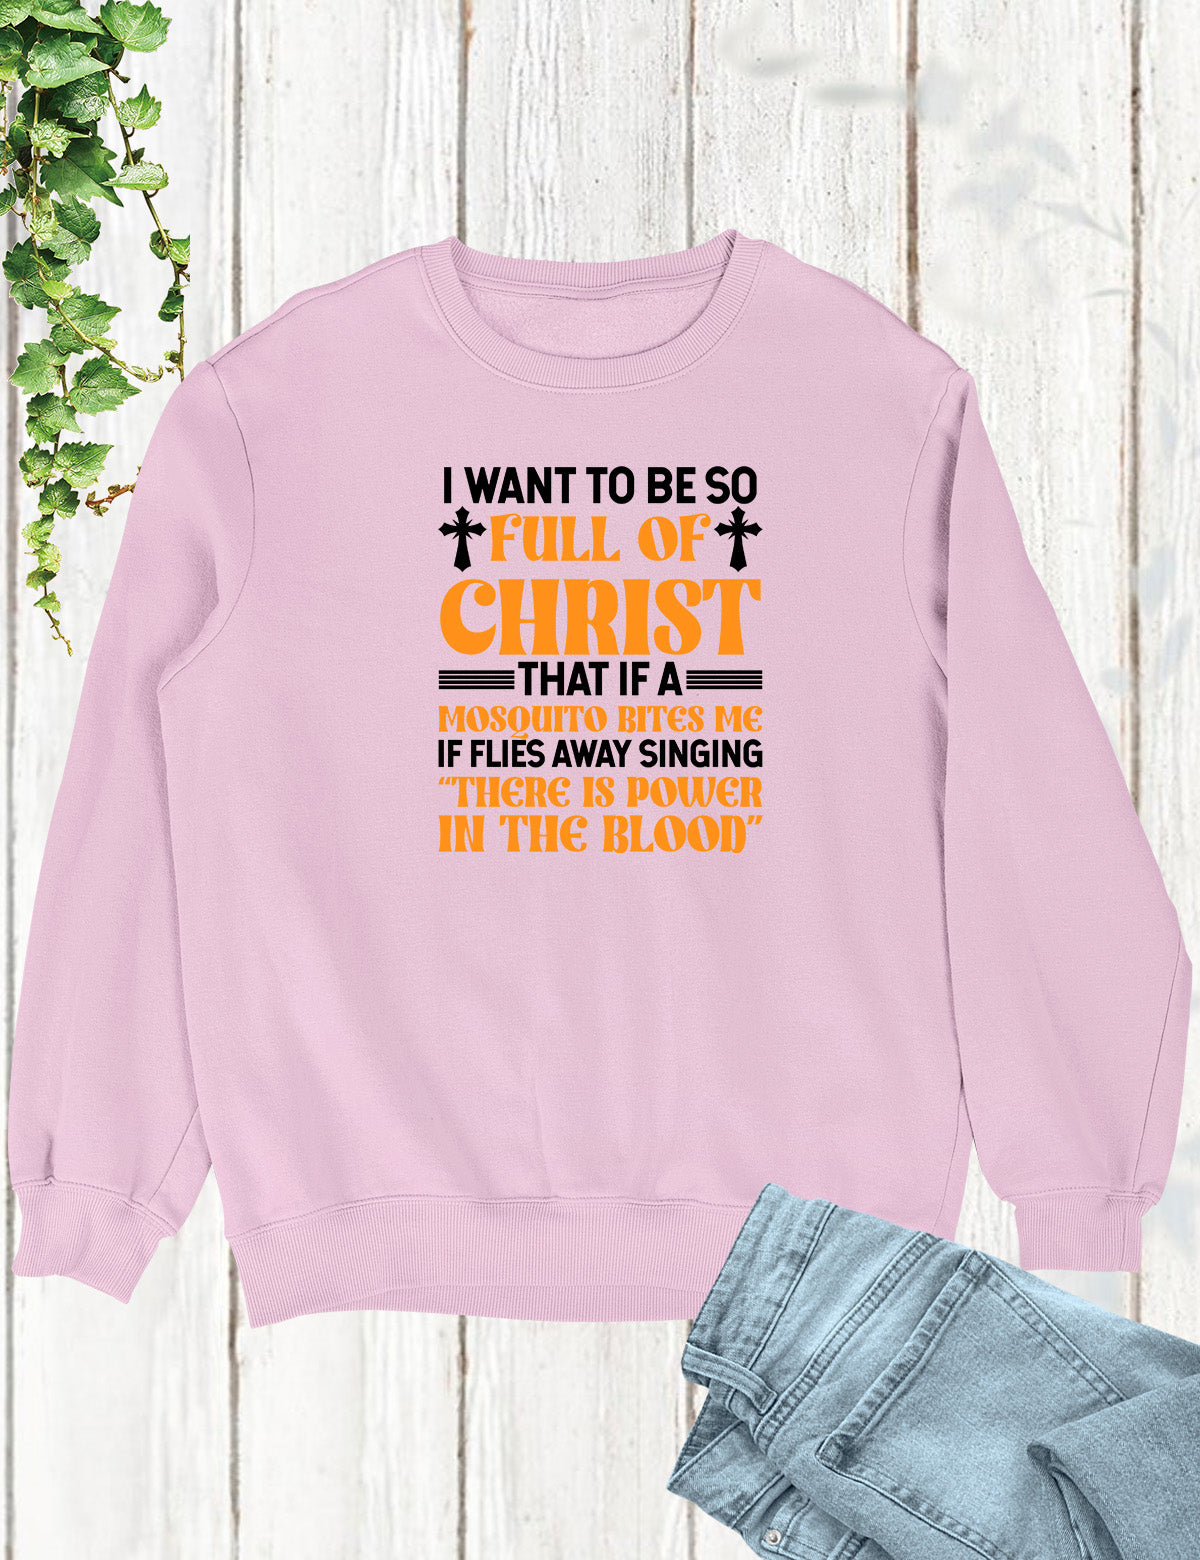 I Want To Be So Full Of Christ Power in The Blood SweatshirtsI Want To Be So Full Of Christ Power in The Blood Sweatshirts